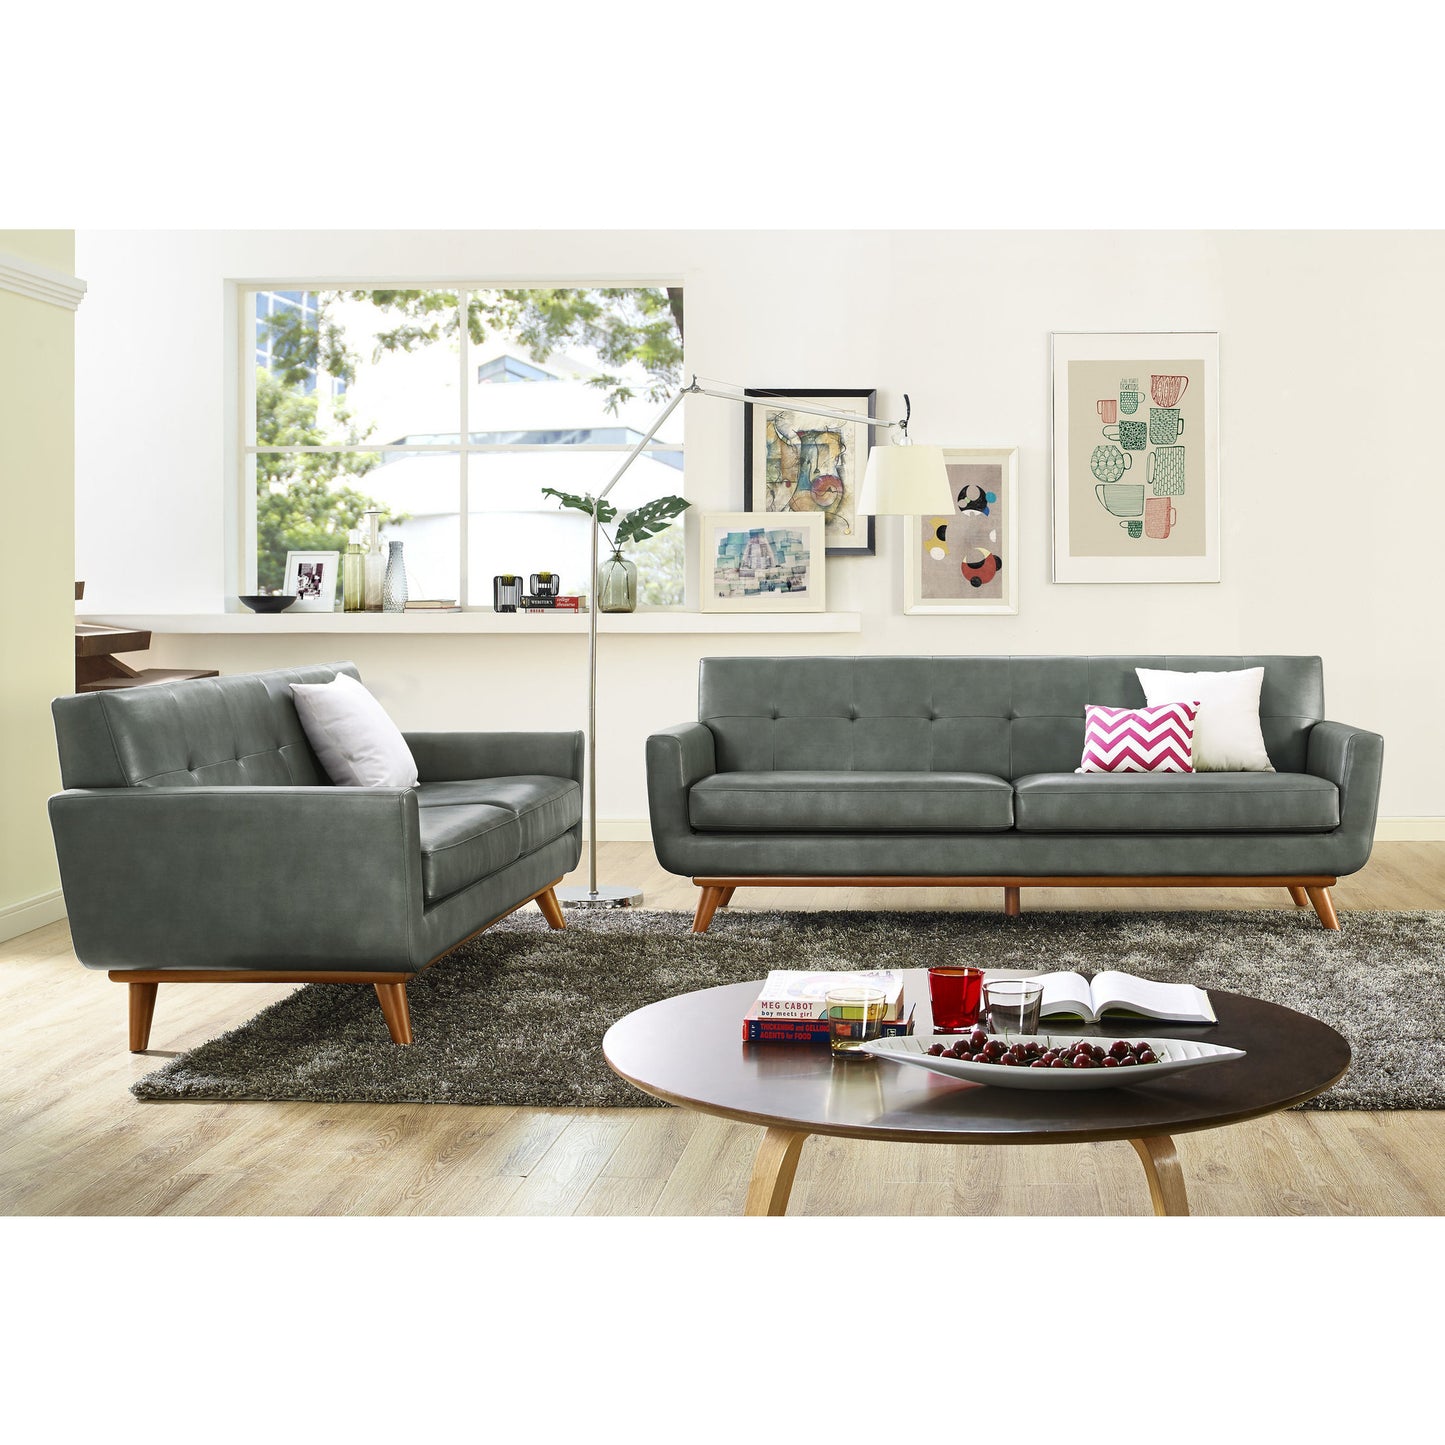 Queen Mary Smoke Grey Leather Loveseat - living-essentials